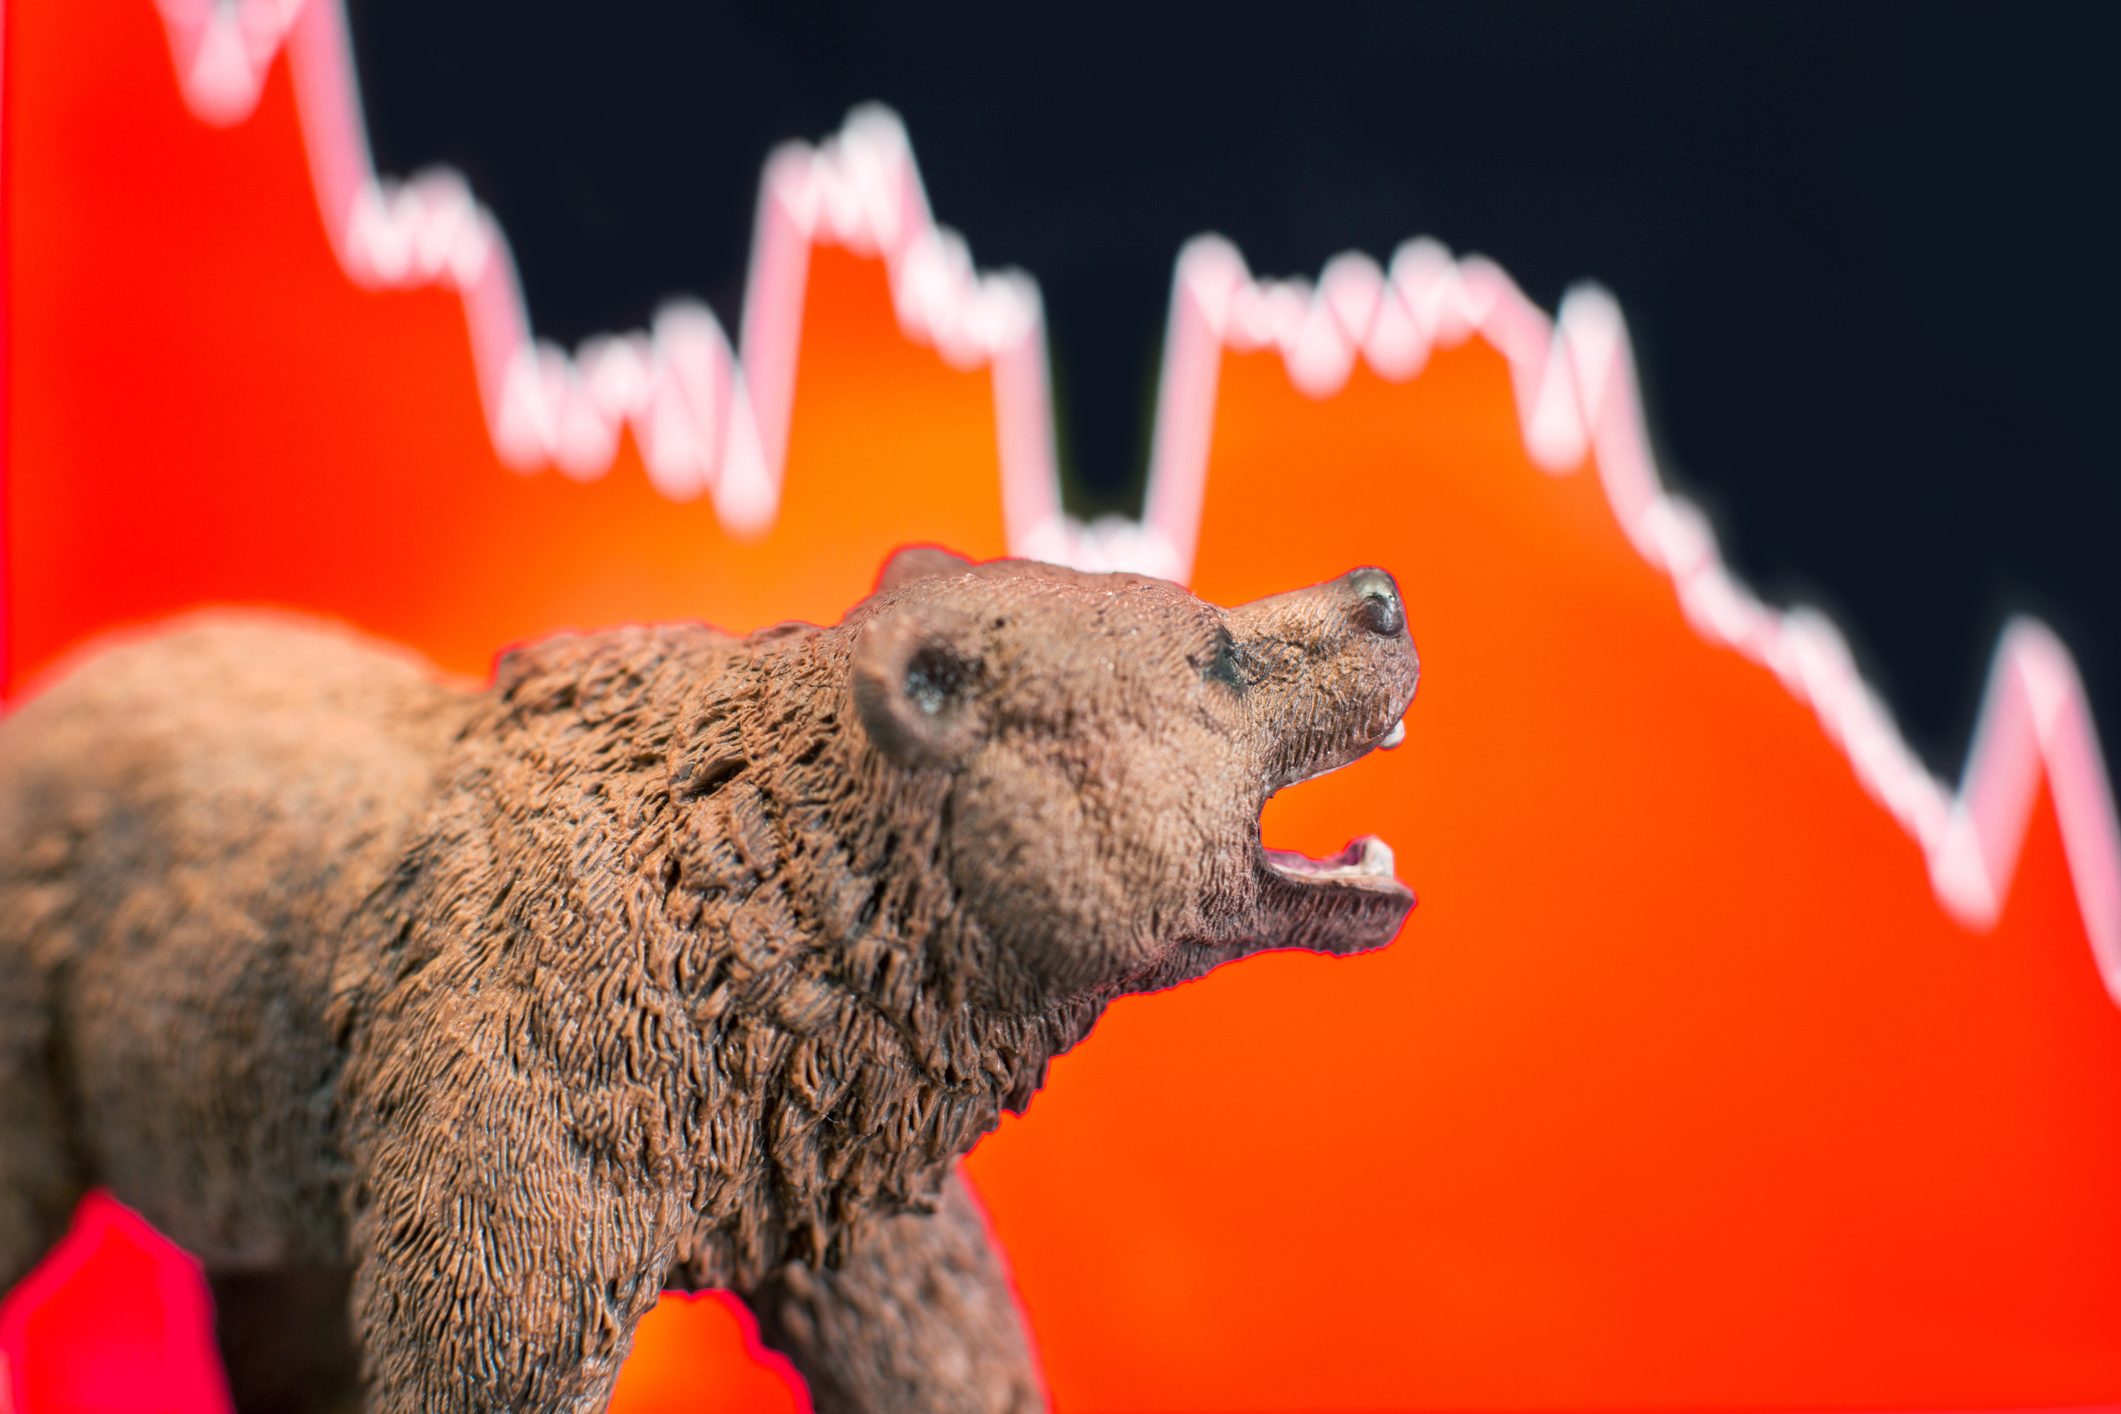 Markets fall for 6th day as bears tighten grip